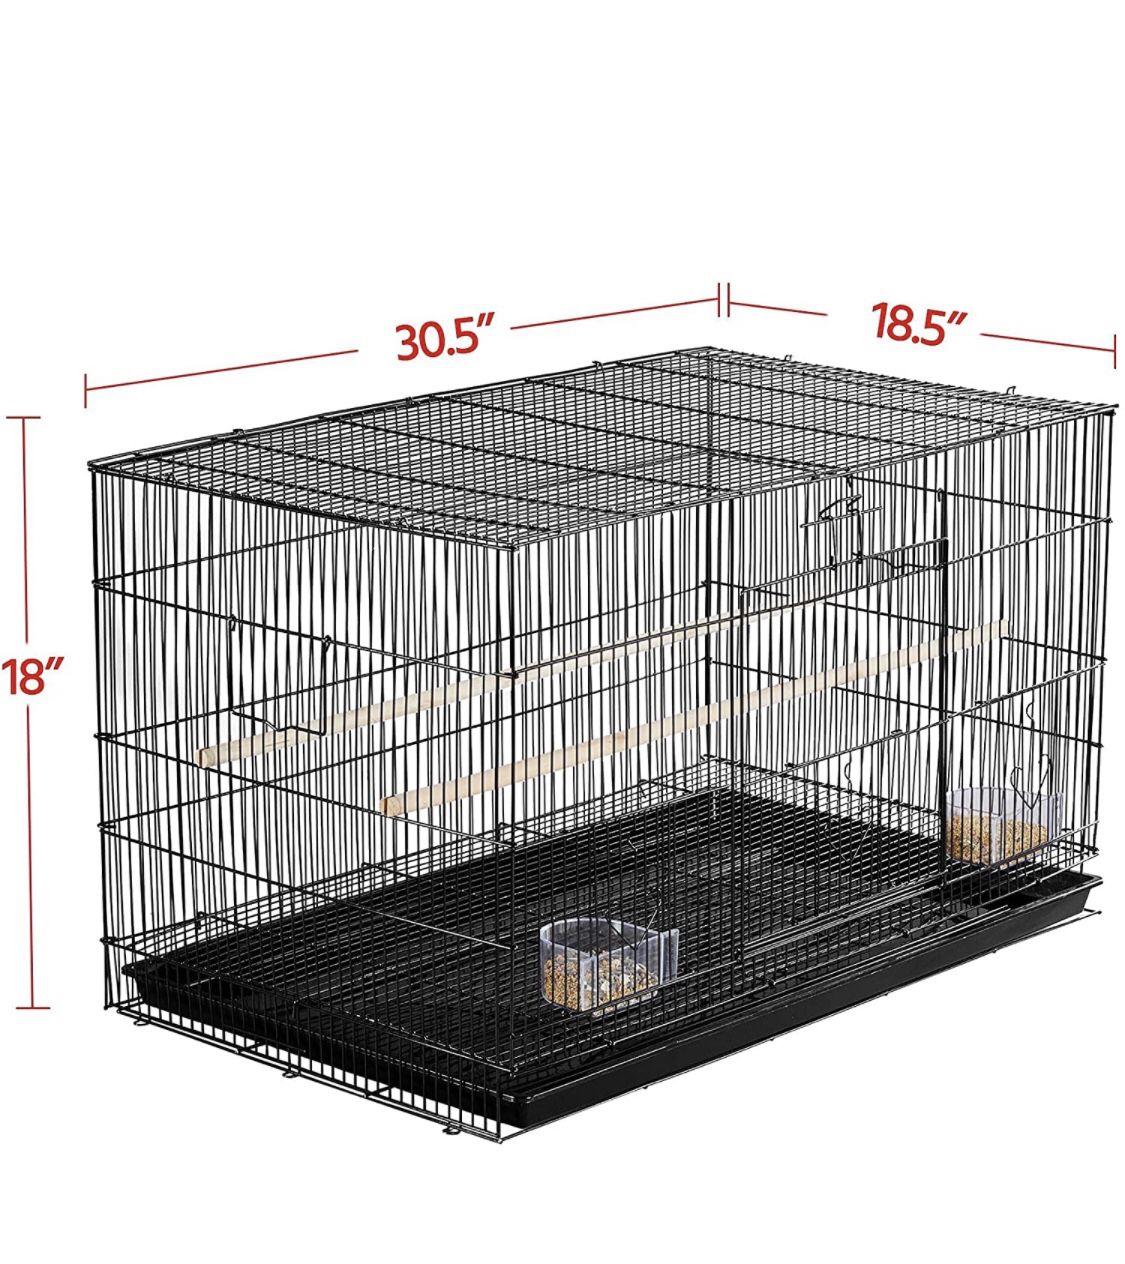 New Bird Cage For Parakeets, Canaries, Cockatiel, Etc